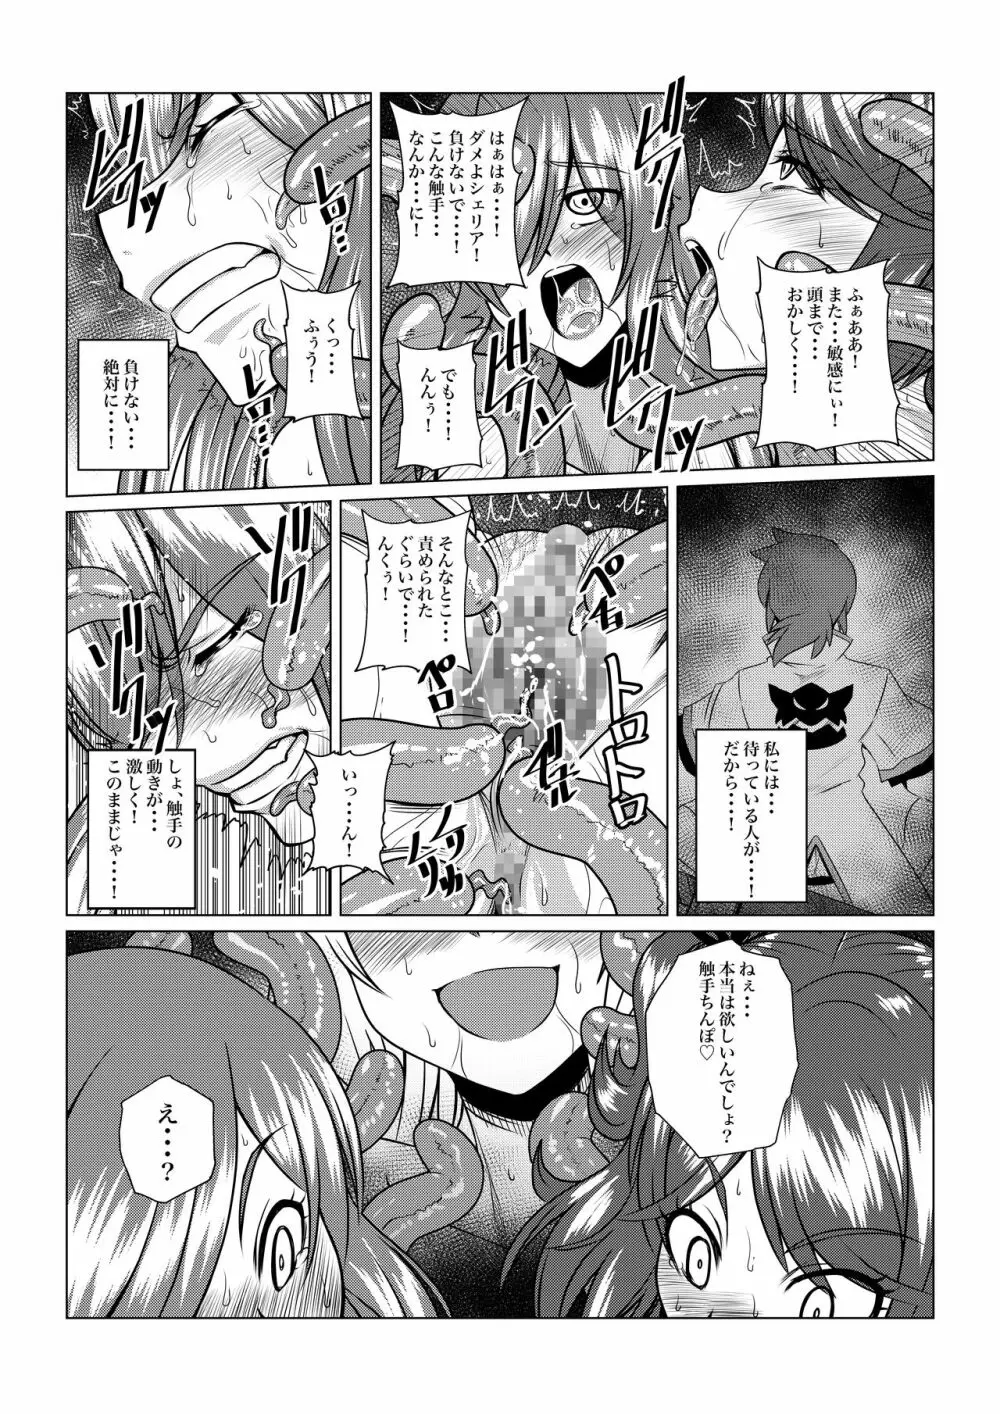 Tales Of DarkSide〜三散華〜 - page13